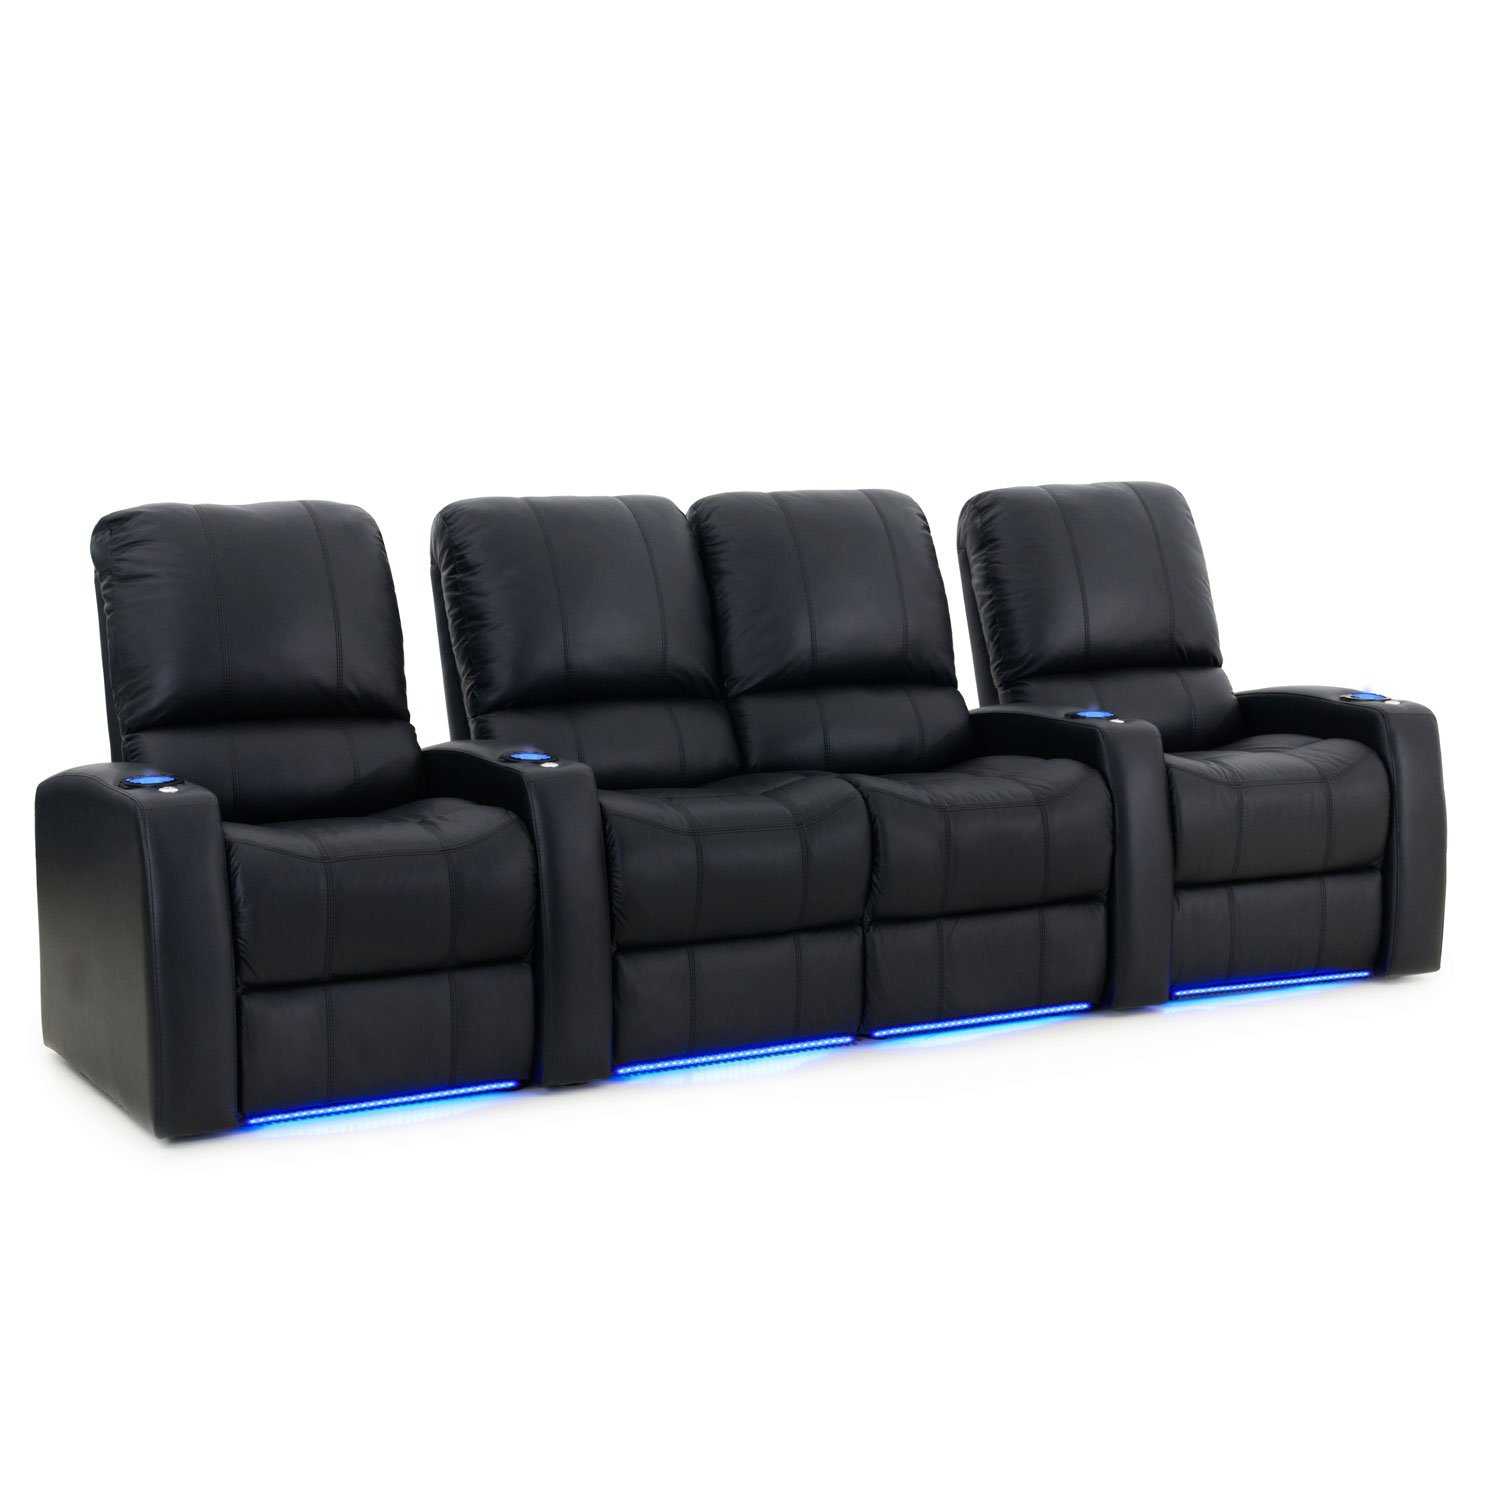 Blaze XL900 Home Theatre Furniture - Black Premium Leather - USB Charging Port - Memory Foam - Accessory Dock - Lighted Cups - Power Recline - Straight Row 4 with Middle Loveseat